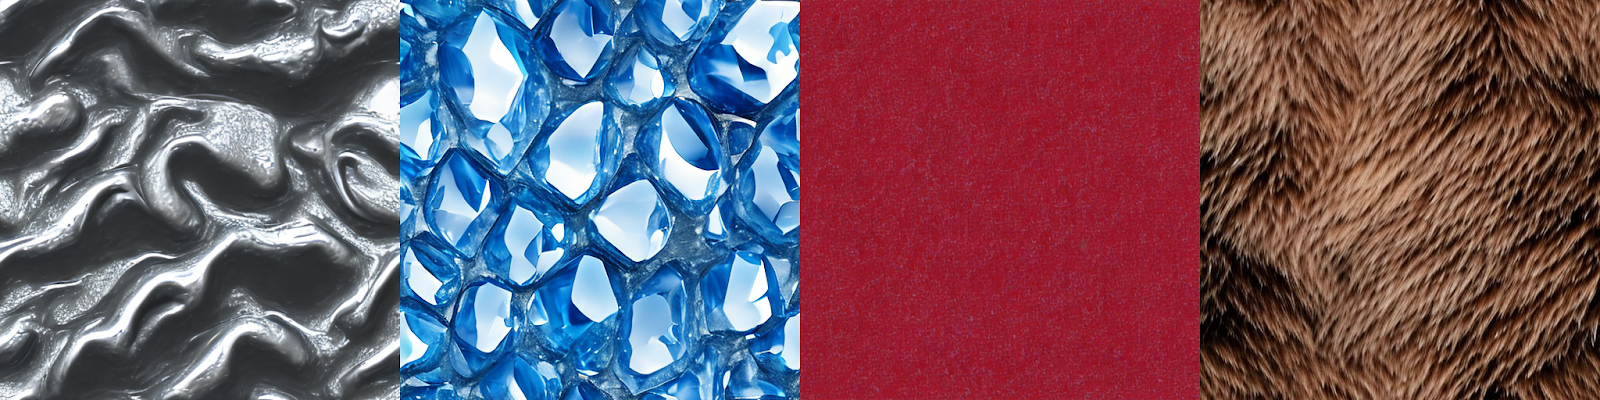 Sample outputs from our first version of Photo-Real-Unity-Texture-1. From left to right: metal slime, blue crystal glass rocks, red fabric, bear fur